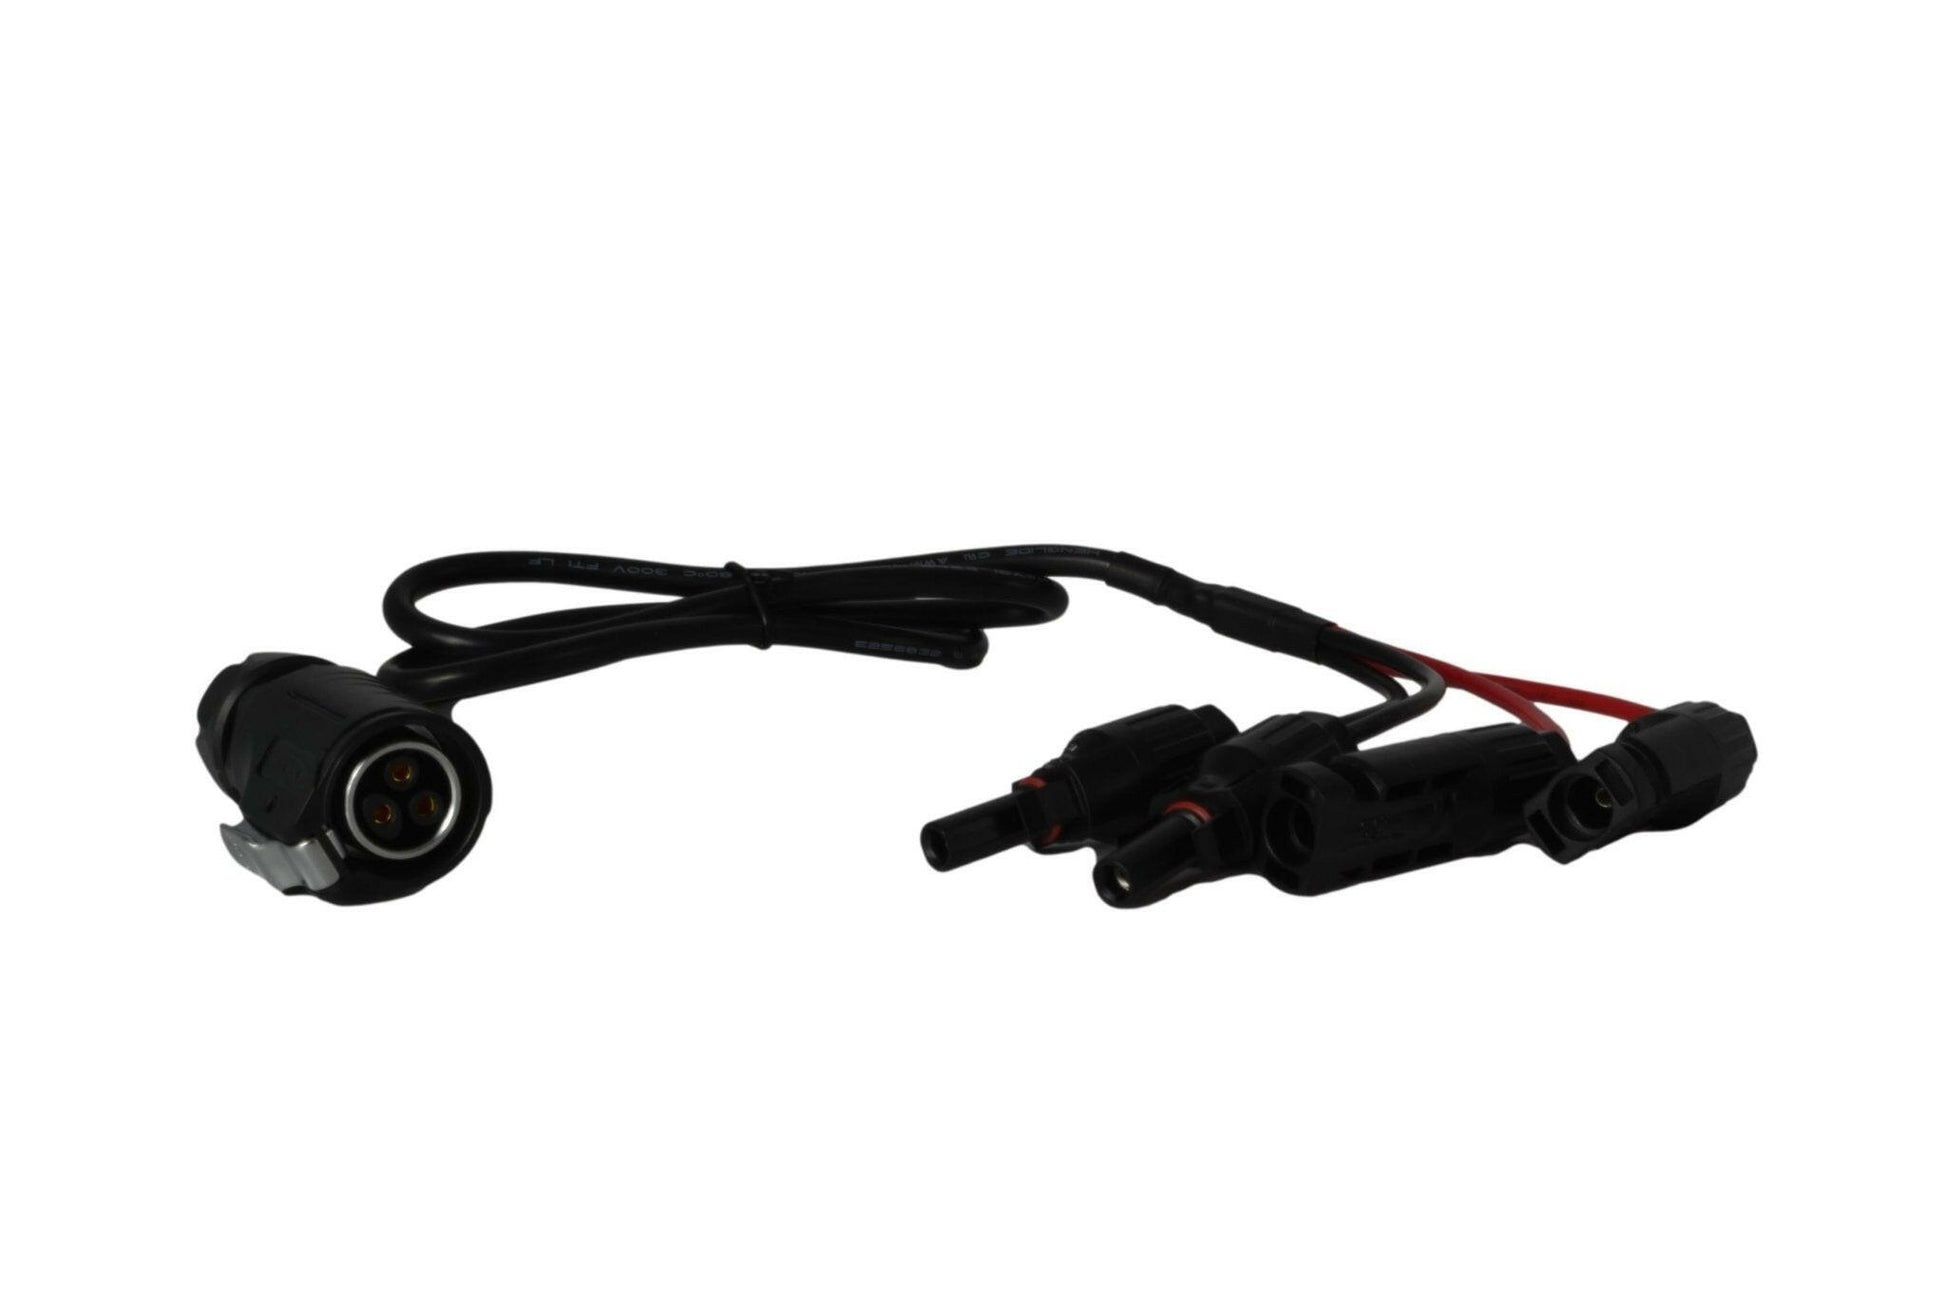 Solar Panel To Minotaur Charge Cable - SR-MSC 1